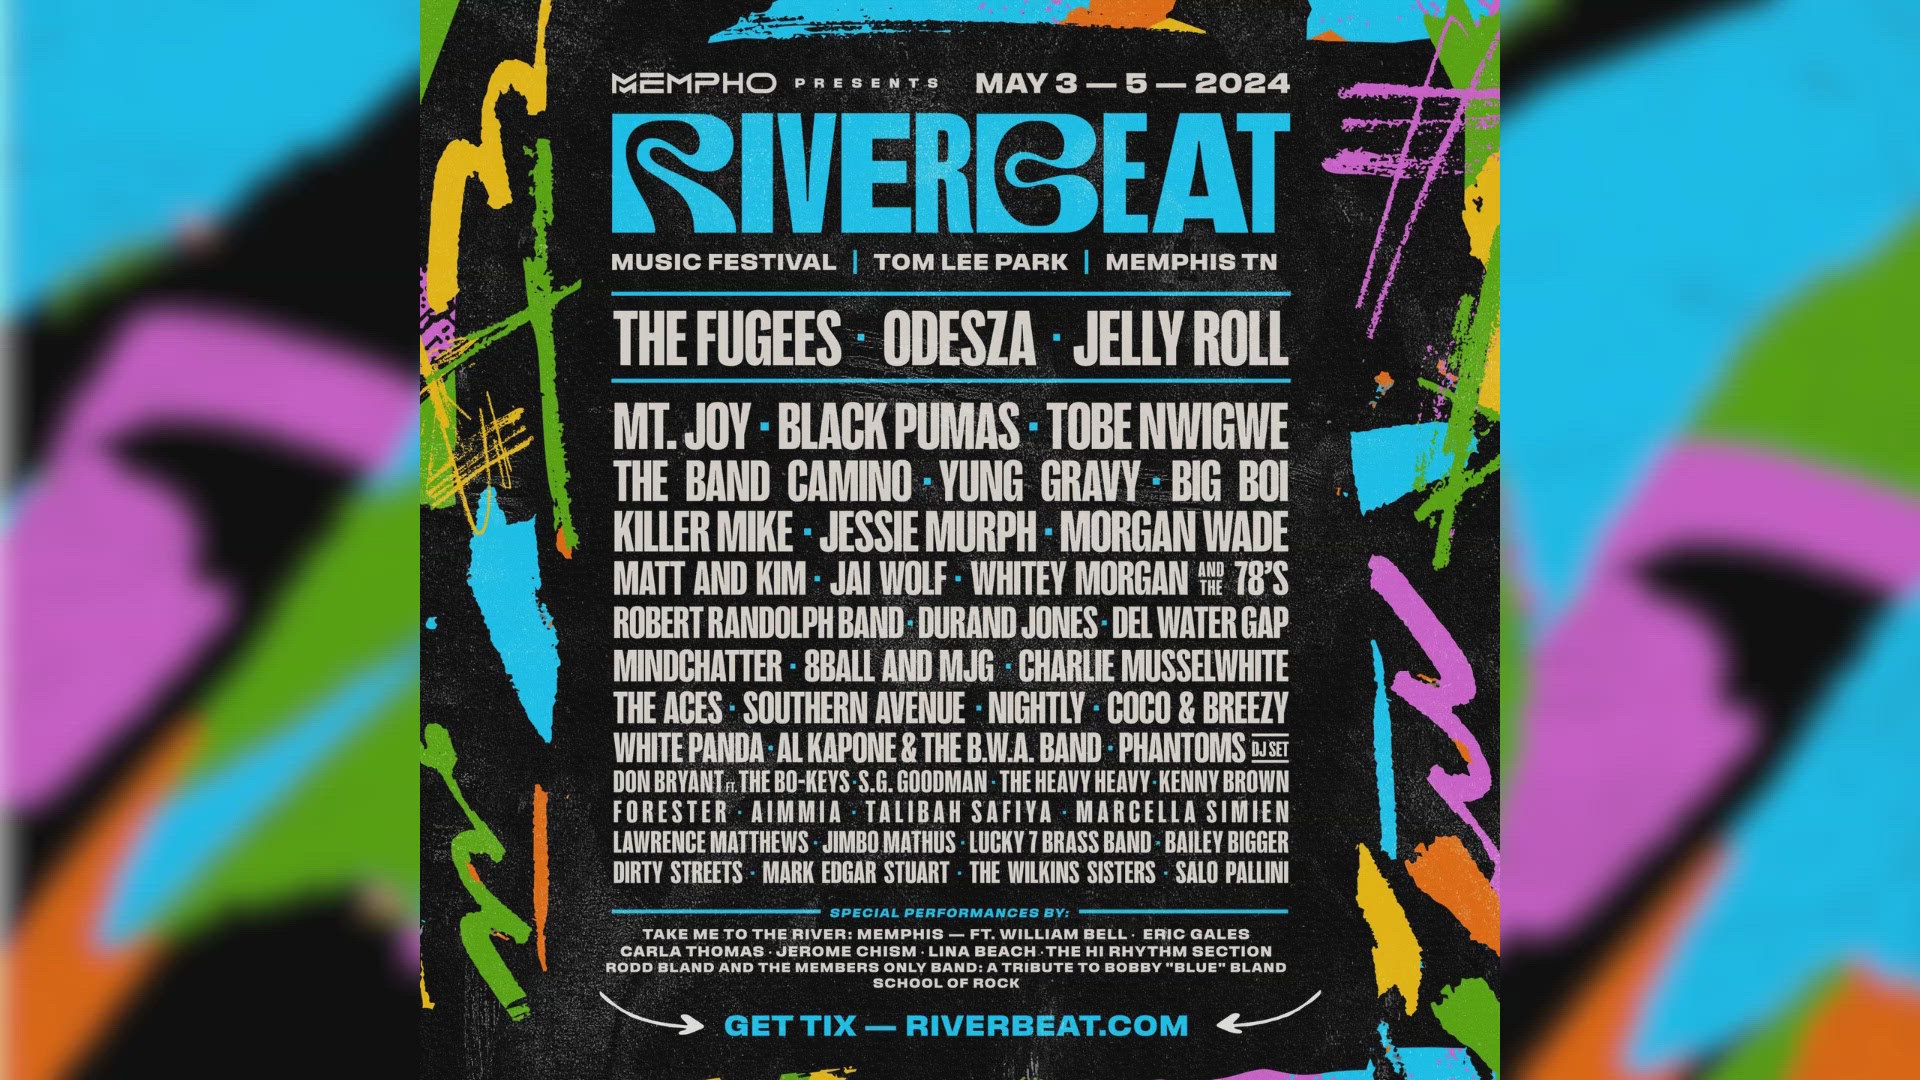 The RiverBeat Music festival will take place May 3-5, 2024. The full 2024 lineup includes The Fugees, Odeza, Jelly Roll and more.